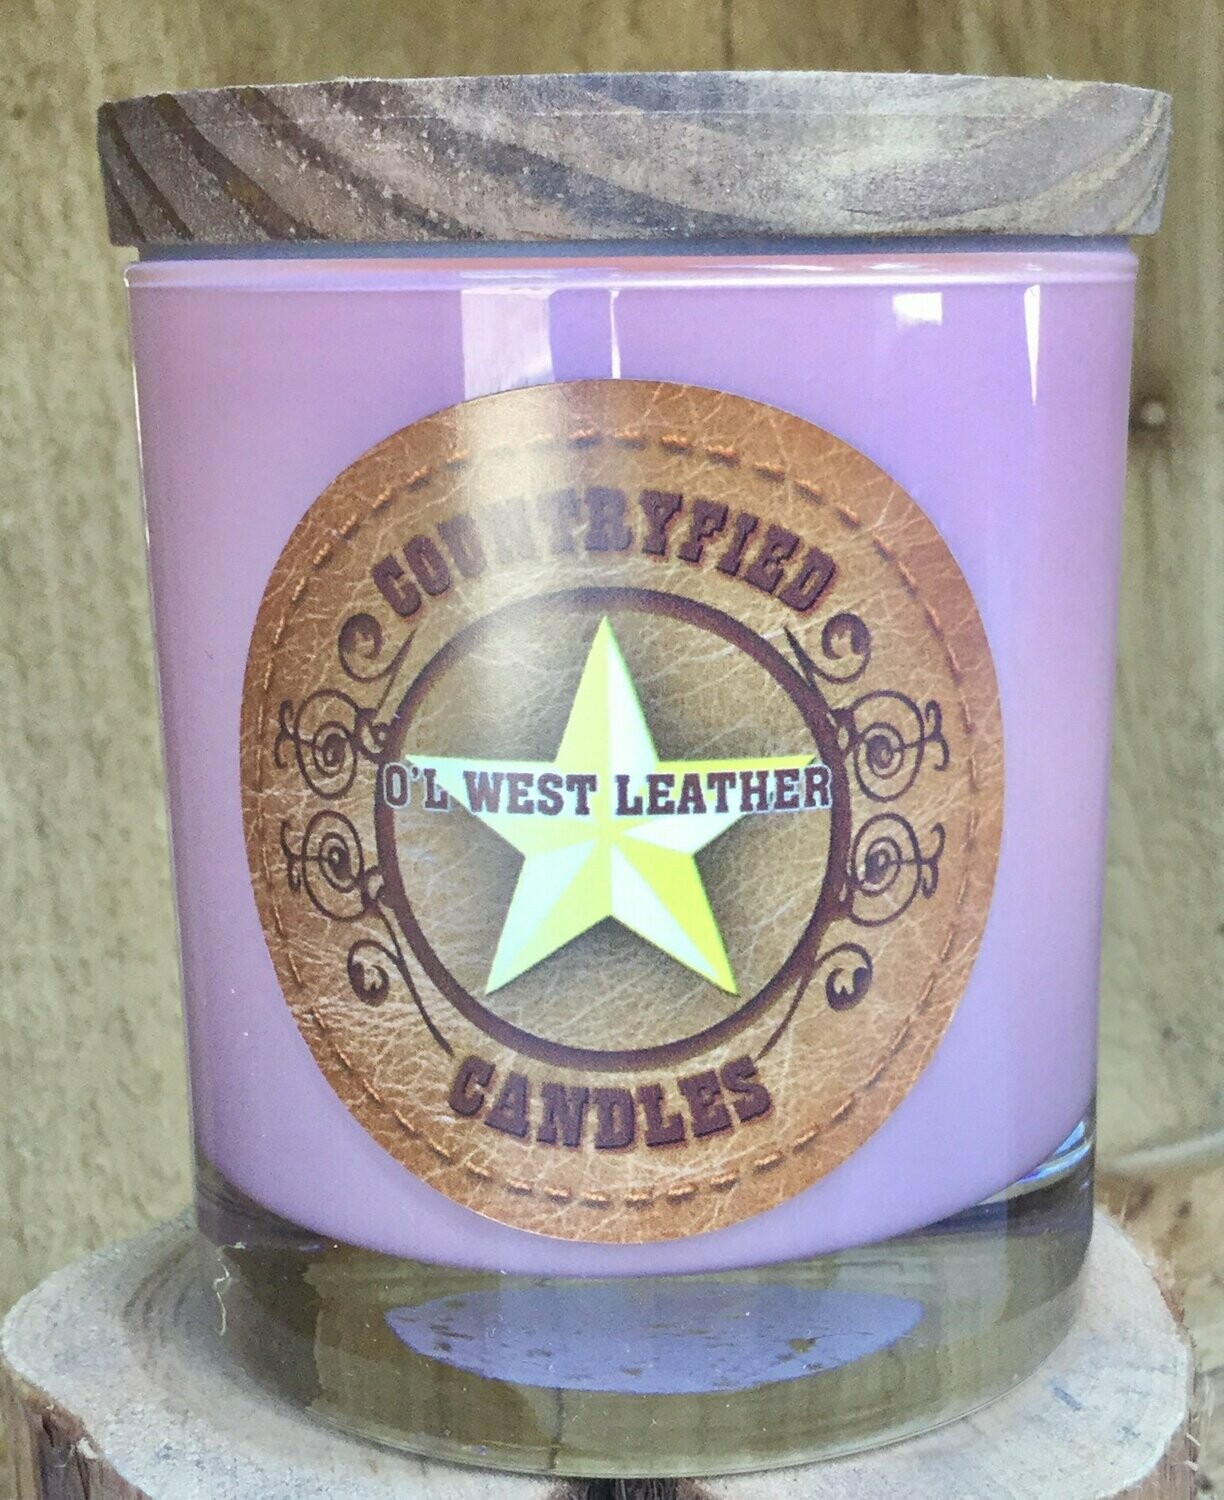 O’l West Leather Country Classic Candle Tumbler 10 oz.